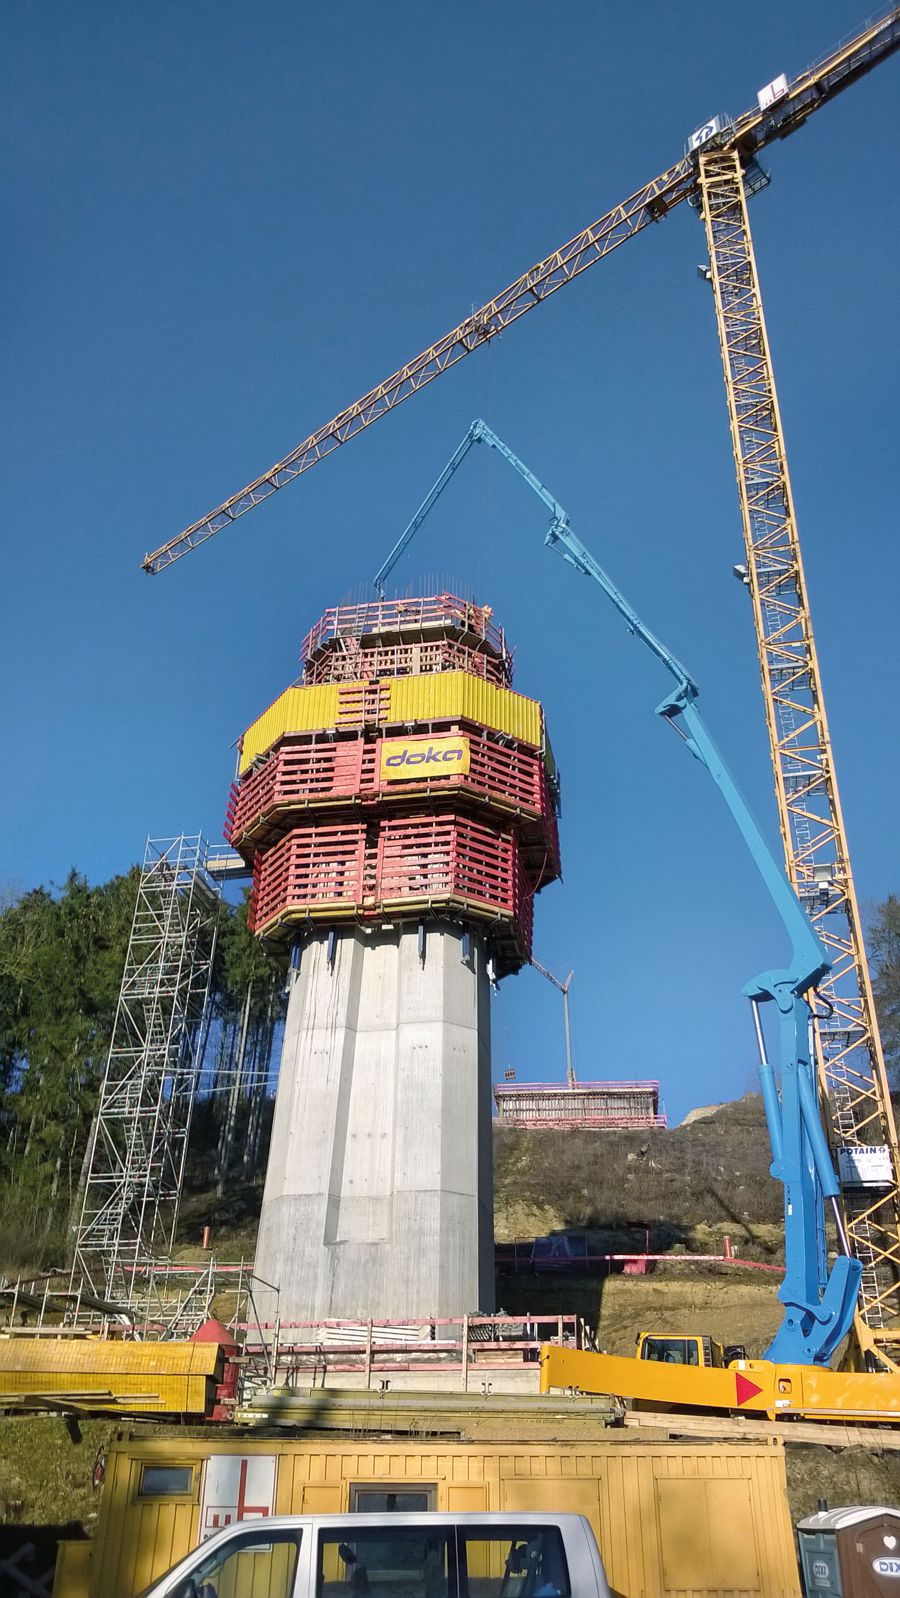 The fully hydraulic SKE100 plus automatic climbing formwork was used for concreting the piers.